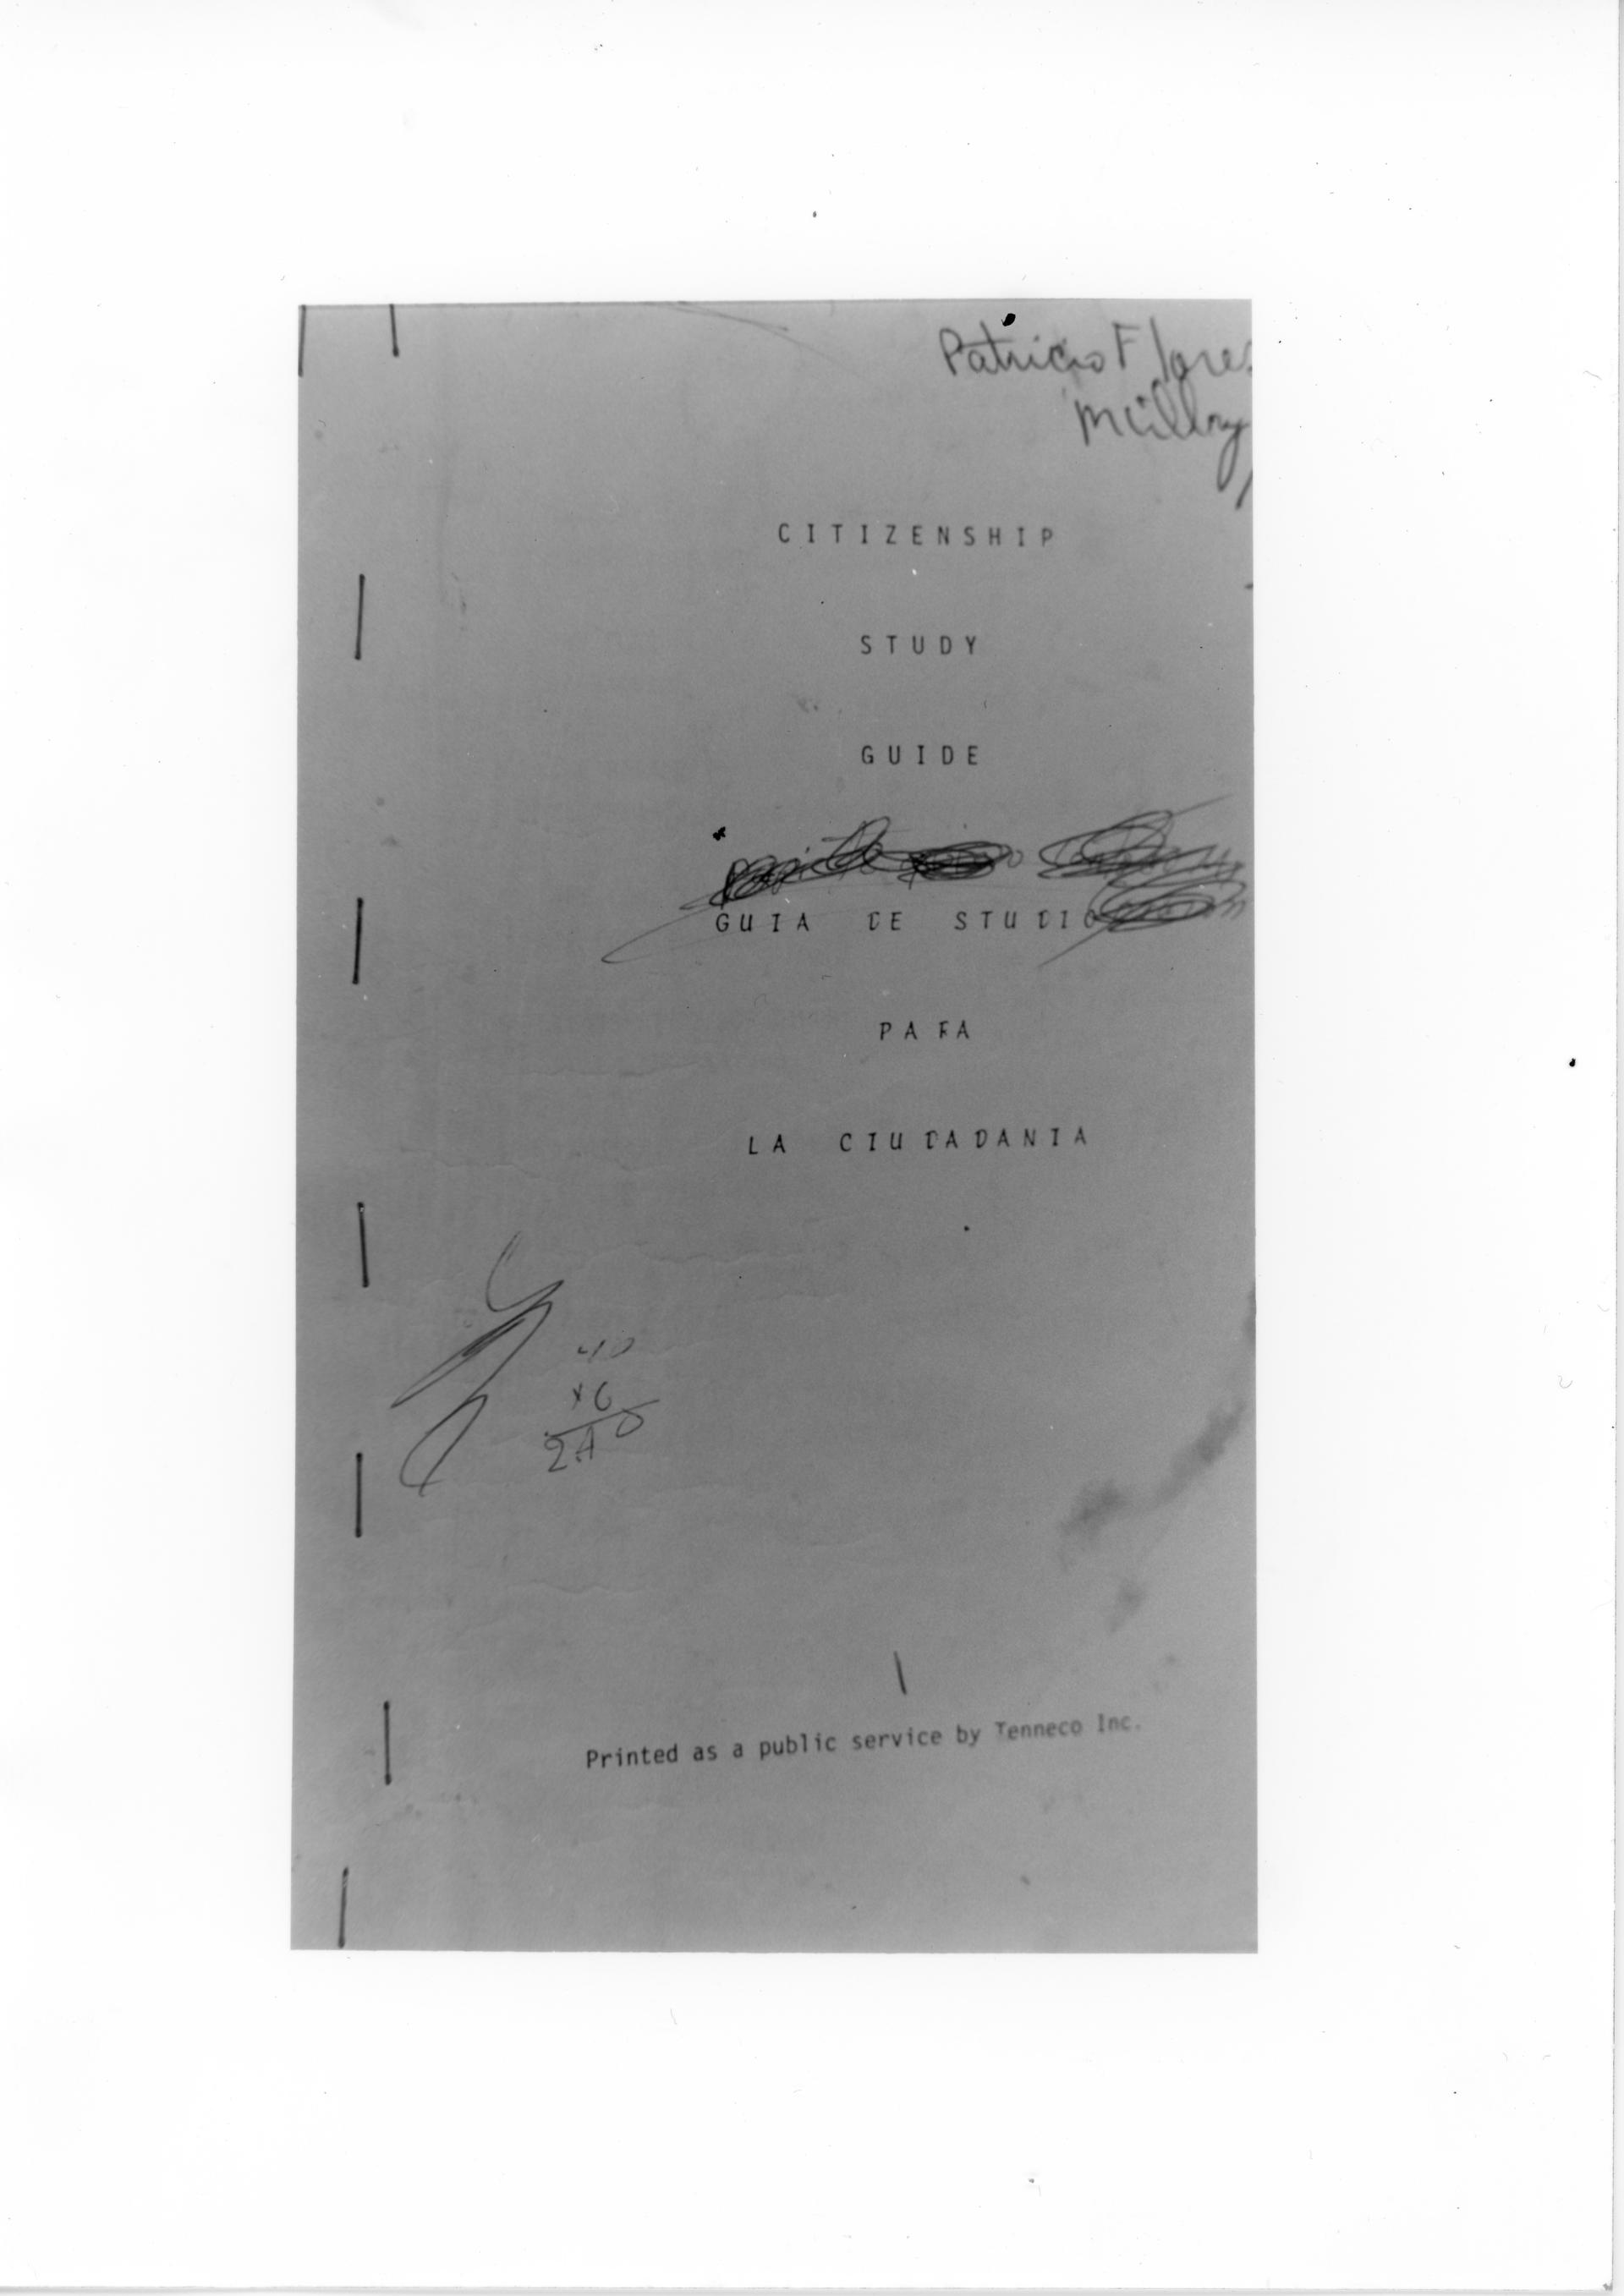 A photo of a document with handwriting 